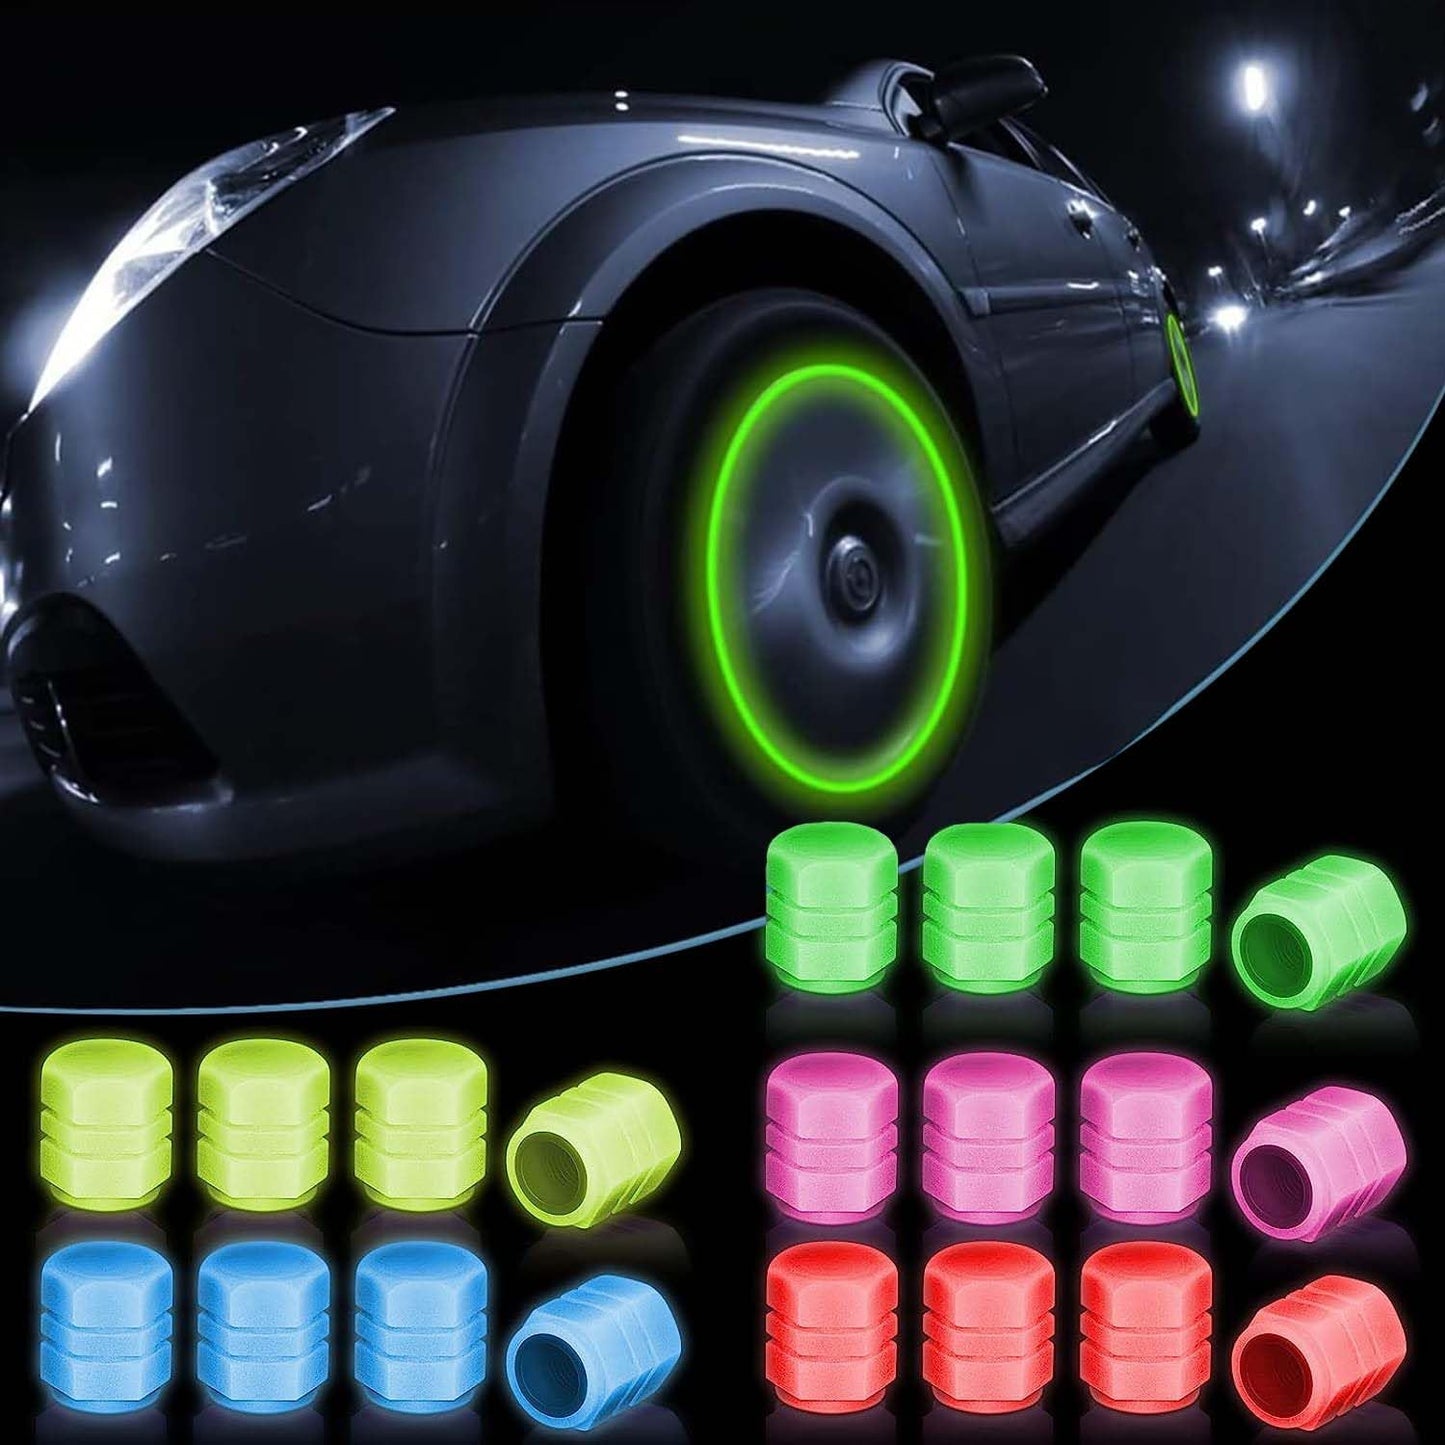 25 PCS Universal Fluorescent Car Tire Valve Caps,Durable Glow in Tire Caps for Most Cars, Suvs, Trucks, Motorcycles and Bicycles 5 Colors to Choose From